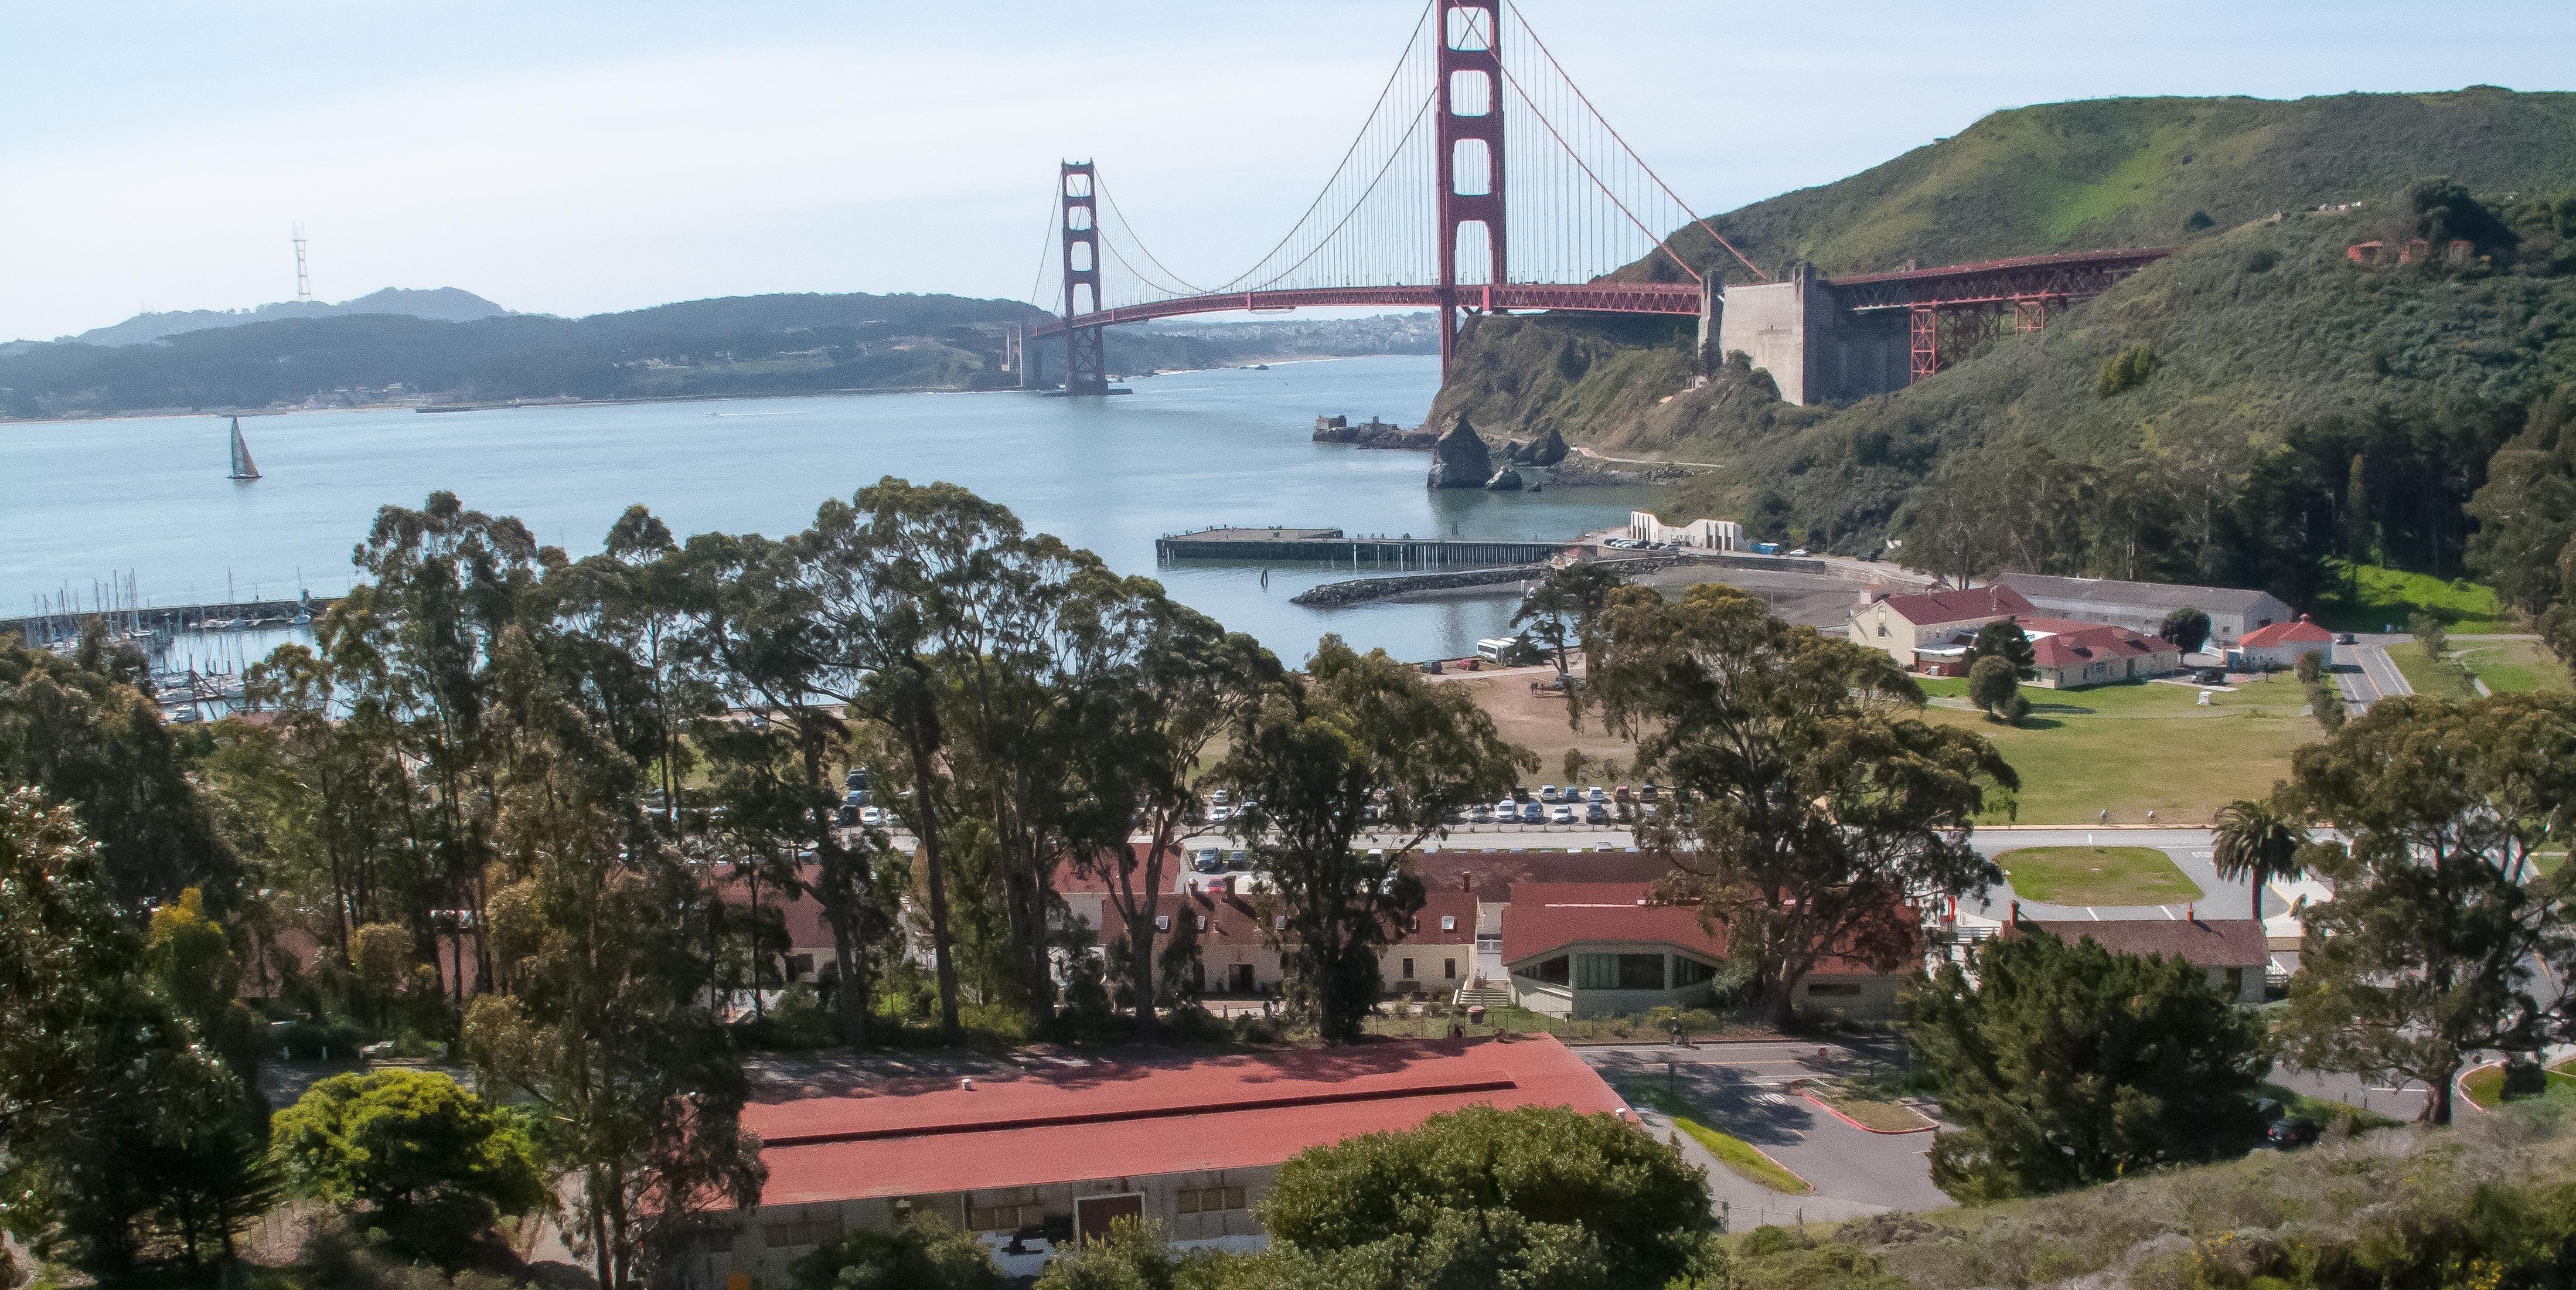 View overlooking Fort Baker and the Golden Gate